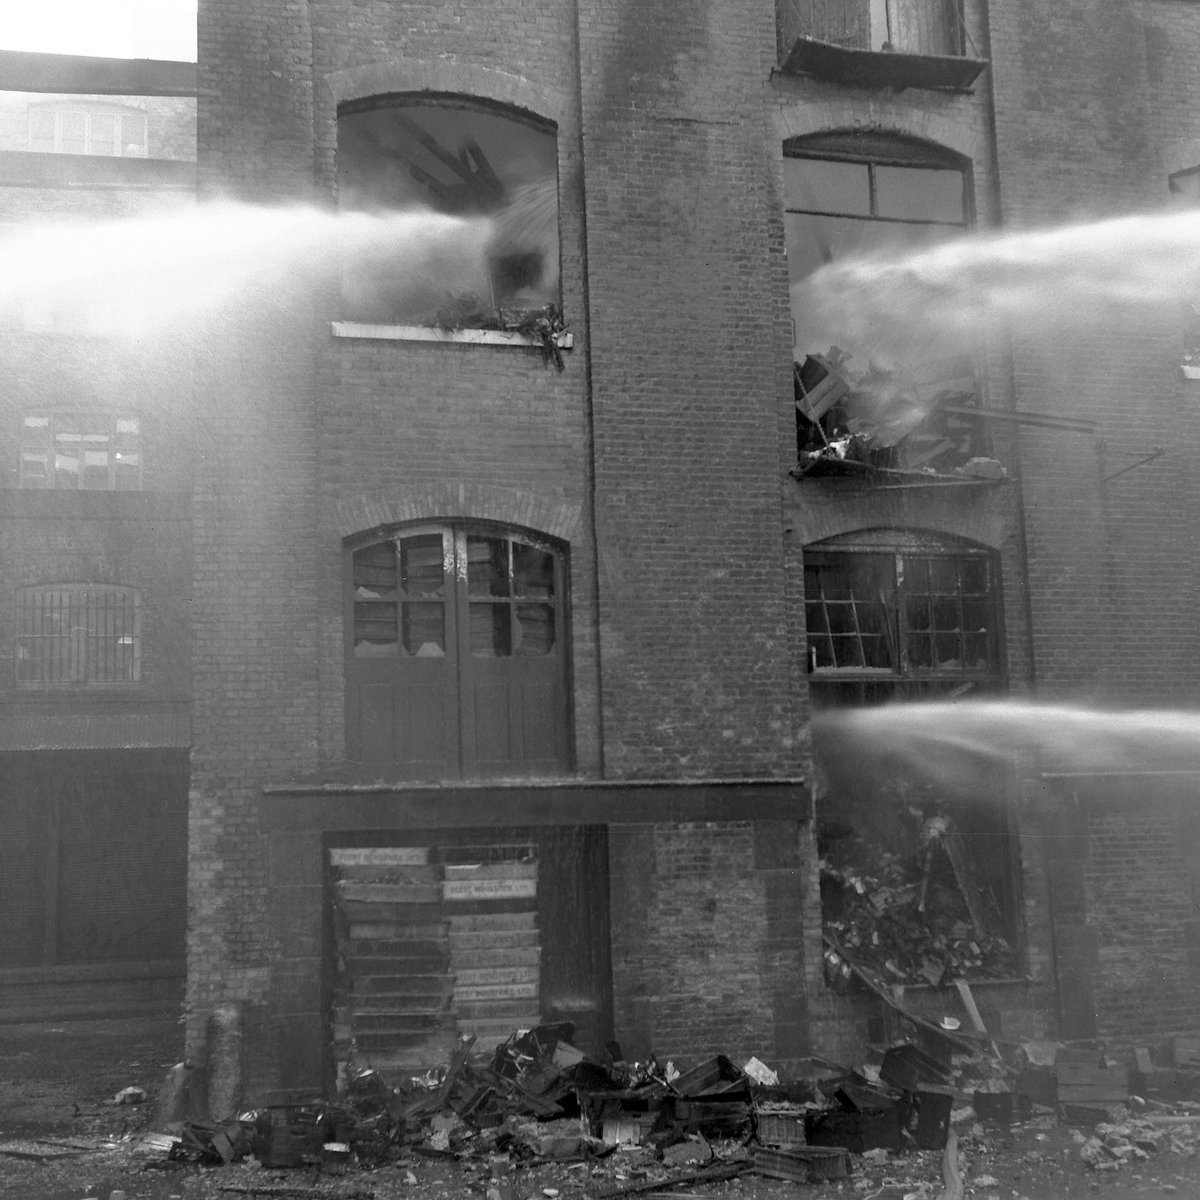 Seventy years ago, three London firefighters lost their lives at a fire near Langley Street, Covent Garden. They were: Station Officer Hawkins Fireman Batt-Rawden Fireman Gadd Today @fbunational will unveil a red plaque, marking the sacrifice they made in service of London